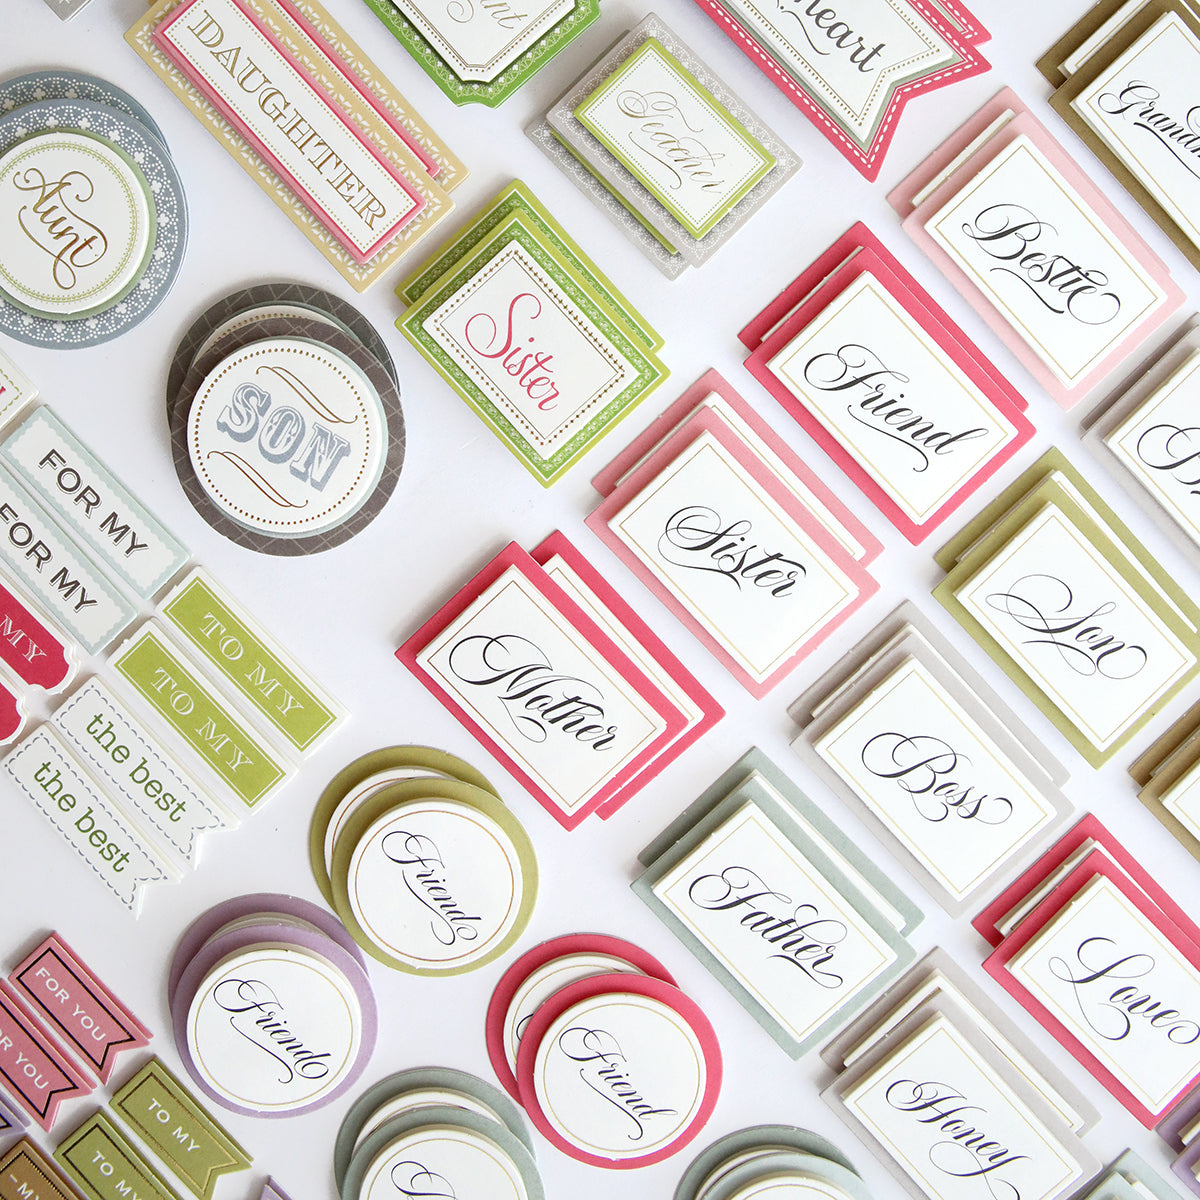 A collection of Nearest and Dearest Sticker Bundle stickers and labels on a white surface.